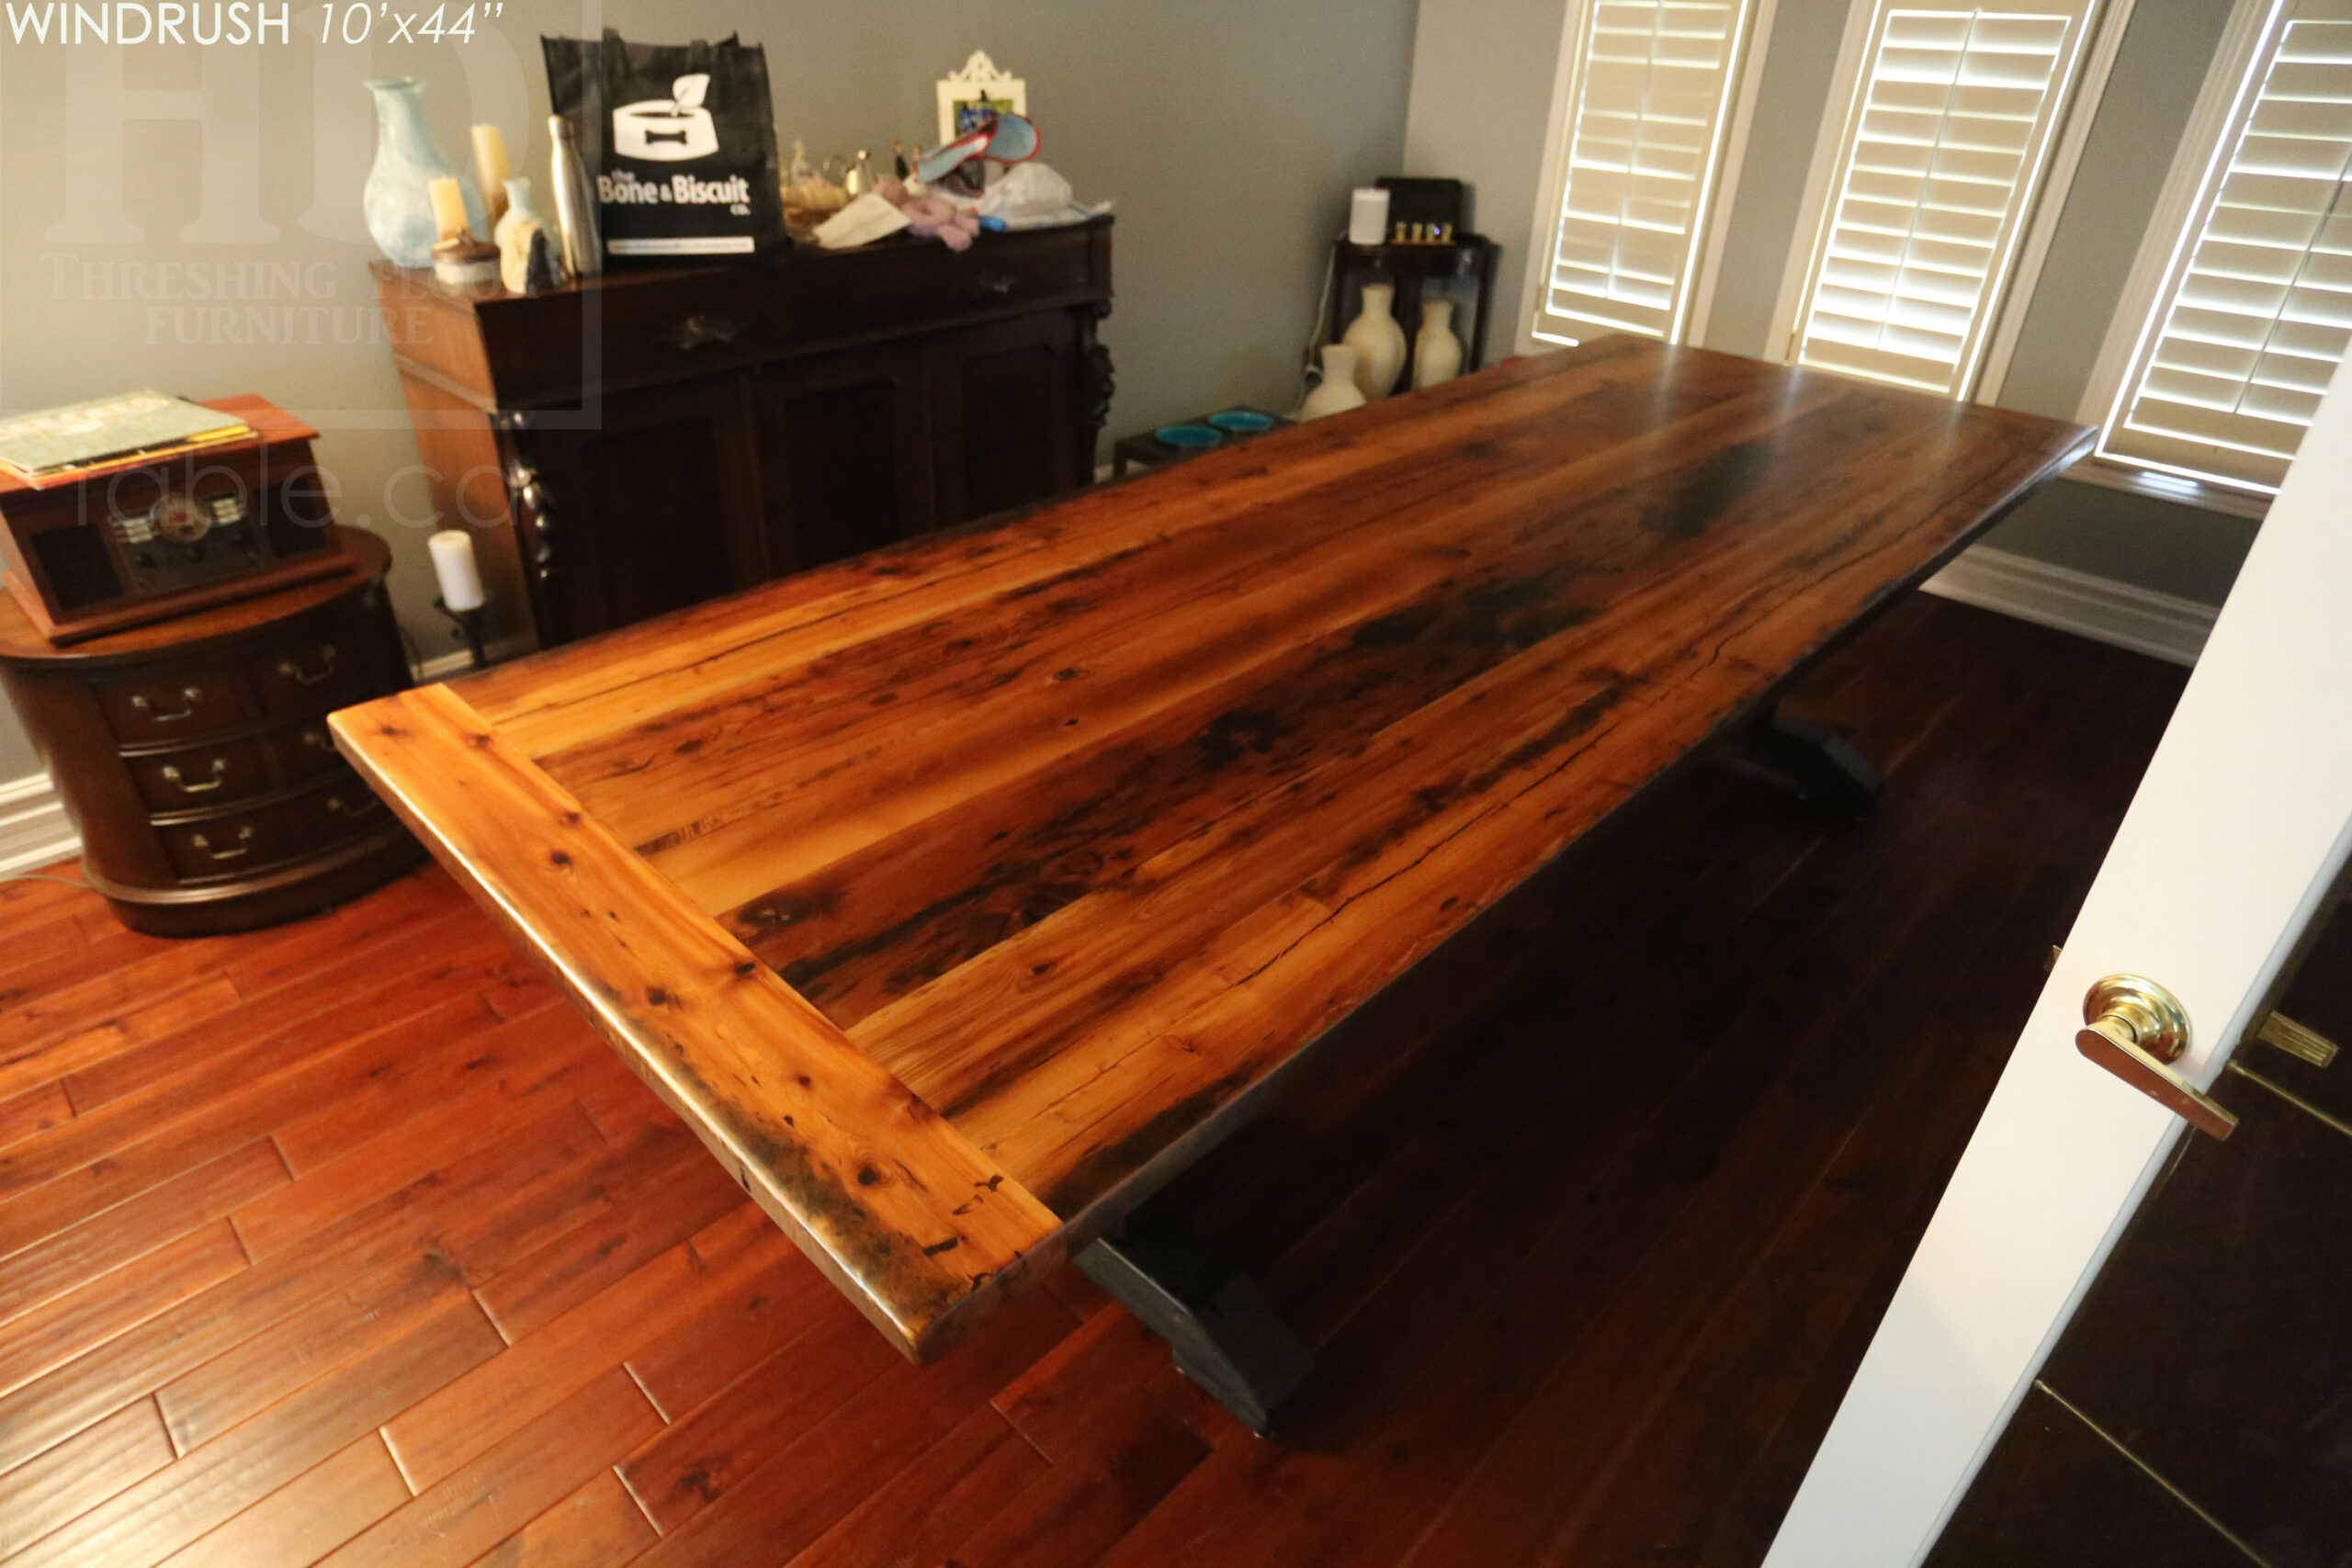 10’ Reclaimed Ontario Barnwood Trestle Table we made for an Oakville, Ontario home – 44” wide - Trestle Base [Painted Black] - Old Growth Hemlock Threshing Floor Construction - Original edges & distressing maintained – Bread Edge Board Ends – Premium epoxy + matte polyurethane finish - www.table.ca